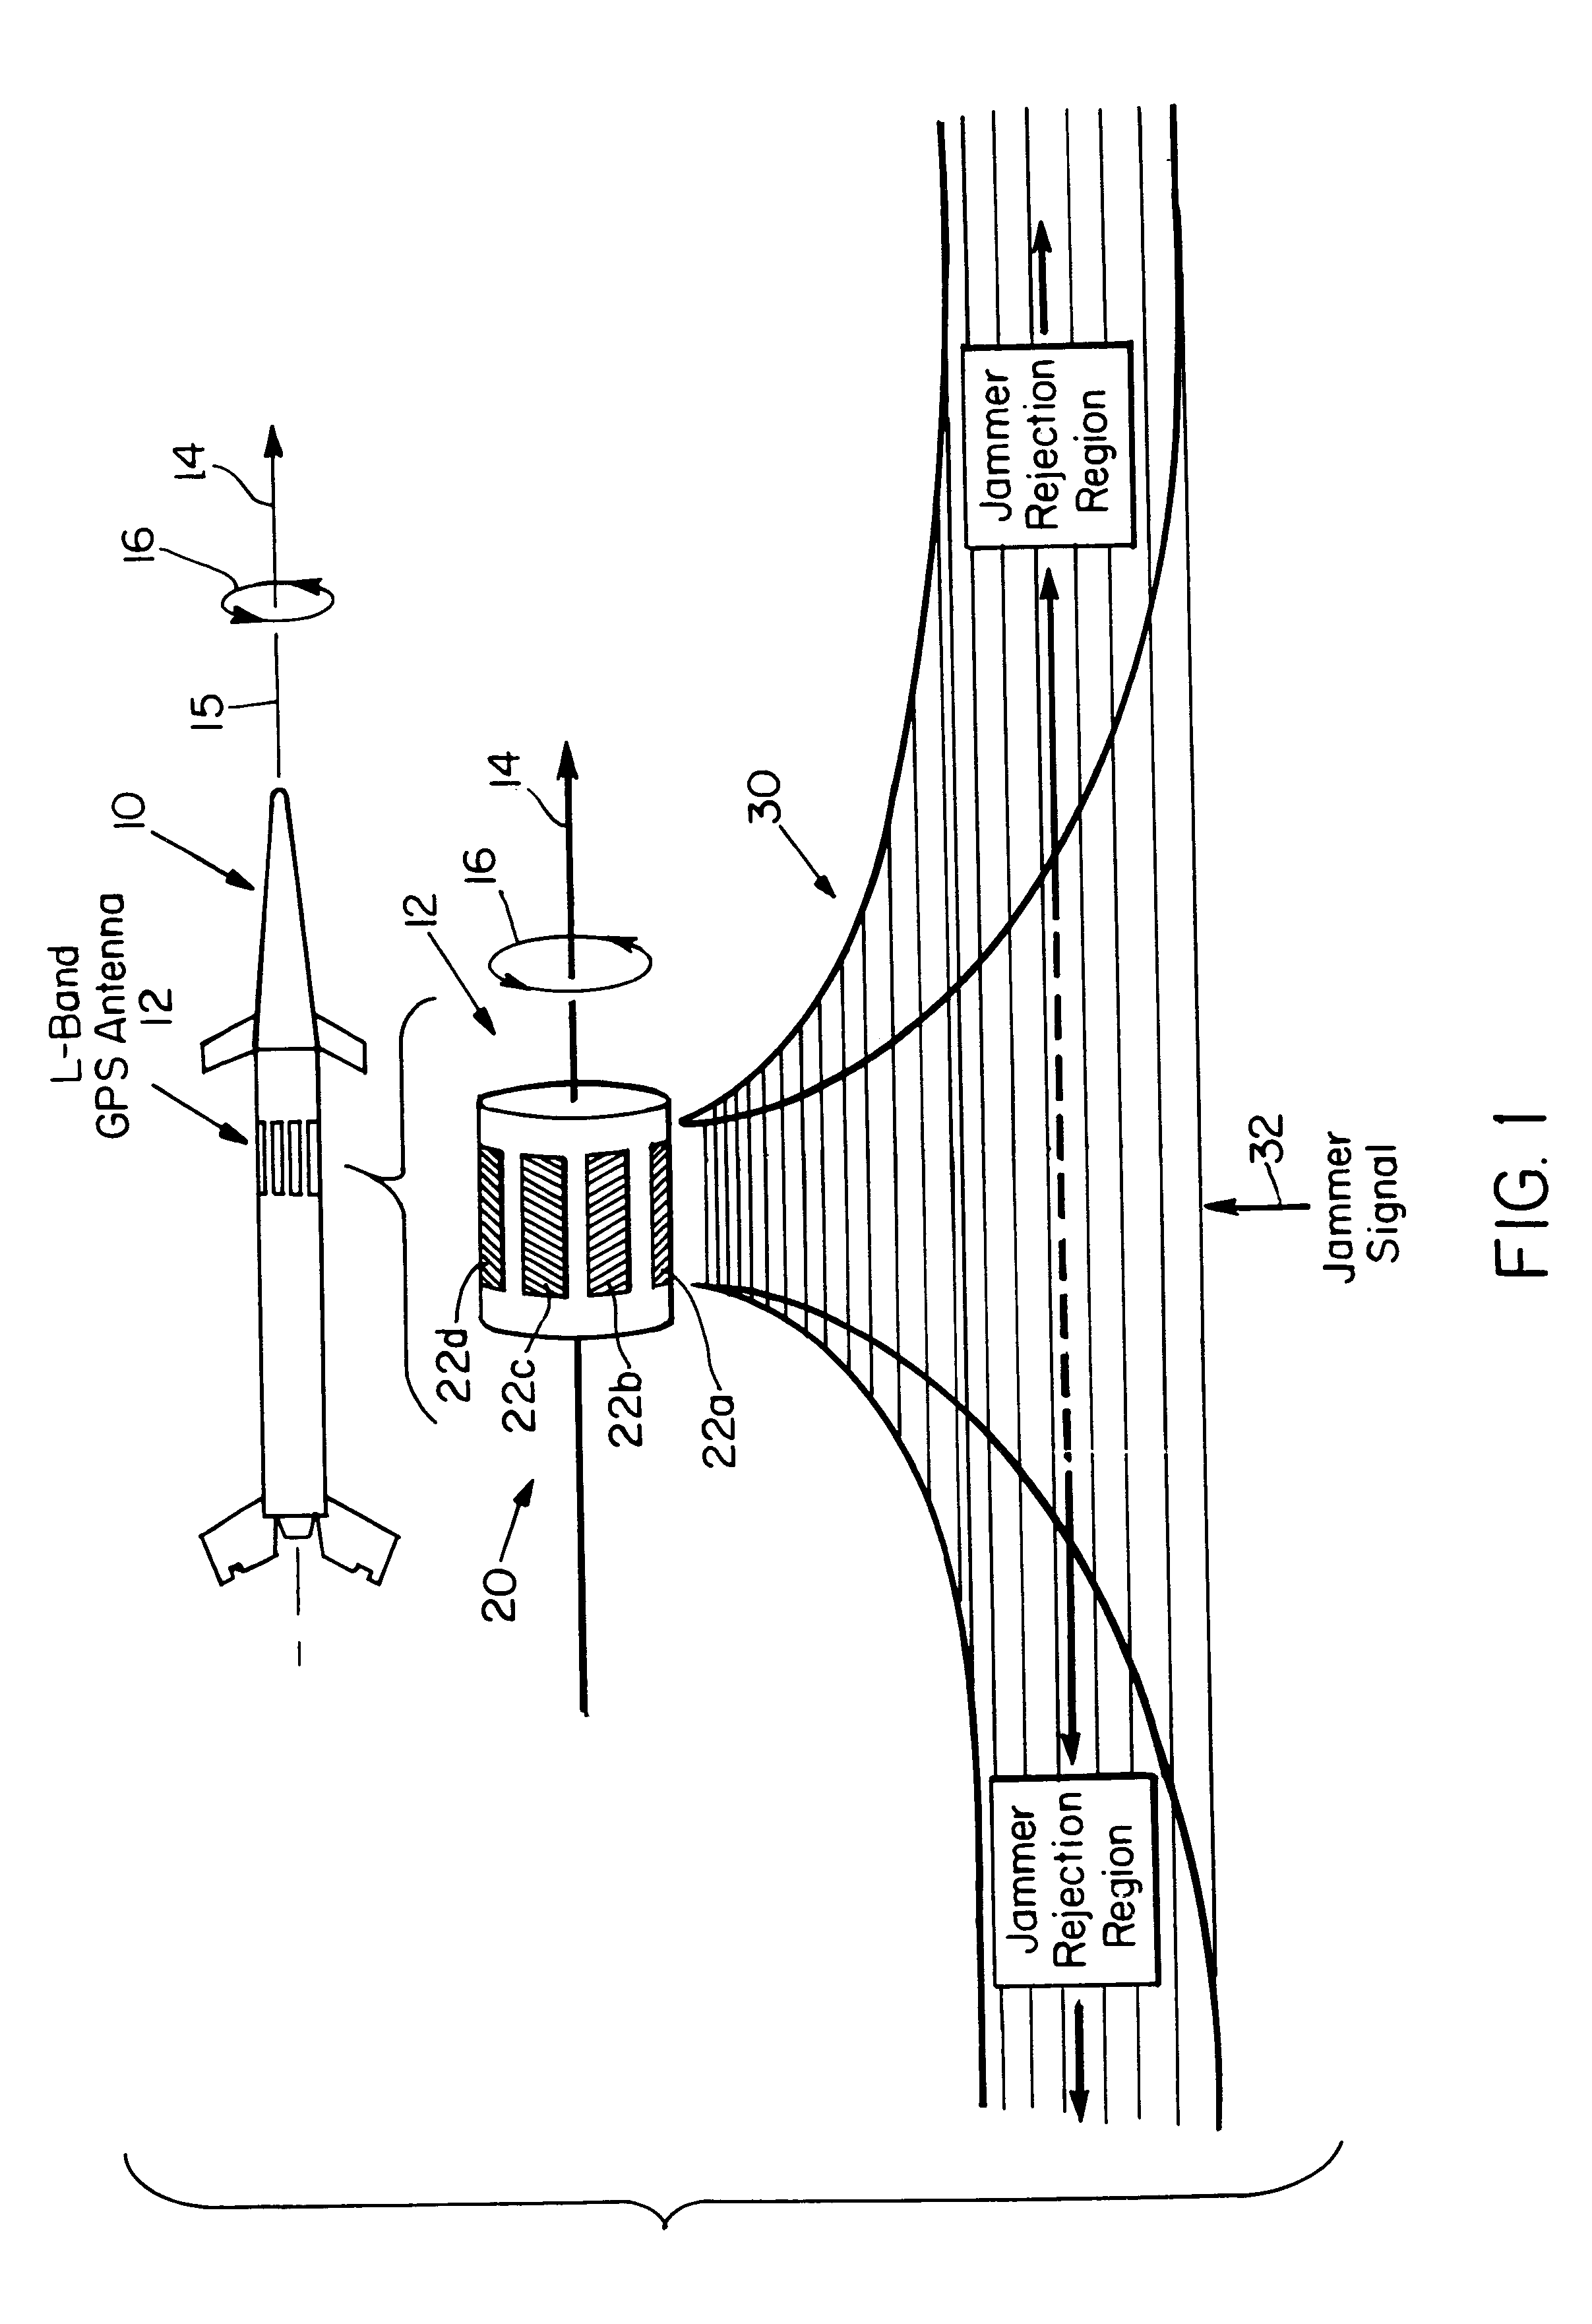 Antijam null steering conformal cylindrical antenna system